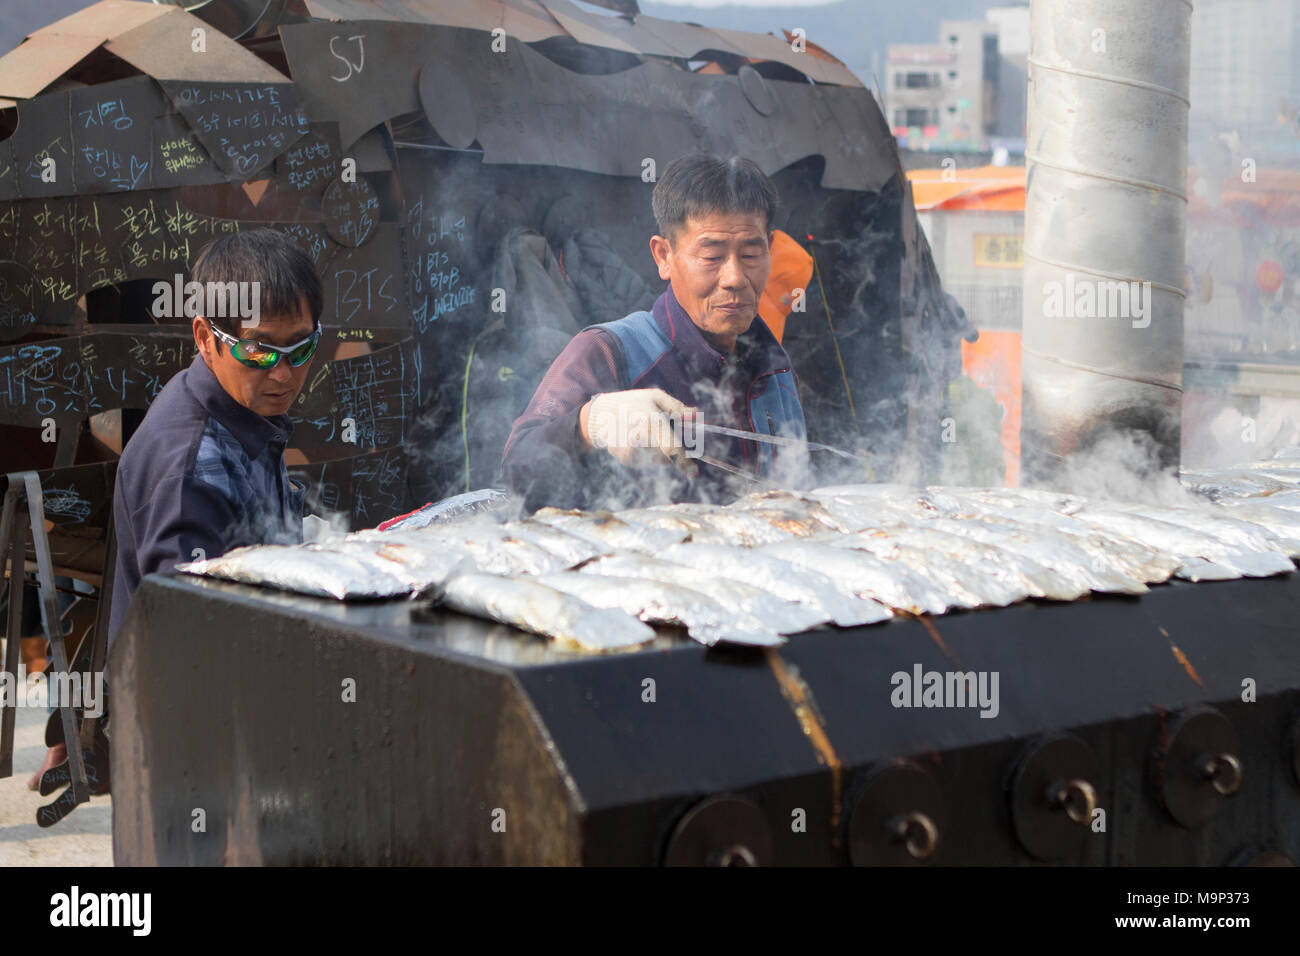 A man is grilling freshly caught fish at the Hwacheon Sancheoneo ice festival.   The Hwacheon Sancheoneo Ice Festival is a tradition for Korean people. Every year in January crowds gather at the frozen river to celebrate the cold and snow of winter. Main attraction is ice fishing. Young and old wait patiently over a small hole in the ice for a trout to bite. In tents they can let the fish grilled after which they are eaten. Among other activities are sledding and ice skating.  The nearby Pyeongchang region will host the Winter Olympics in February 2018. Stock Photo